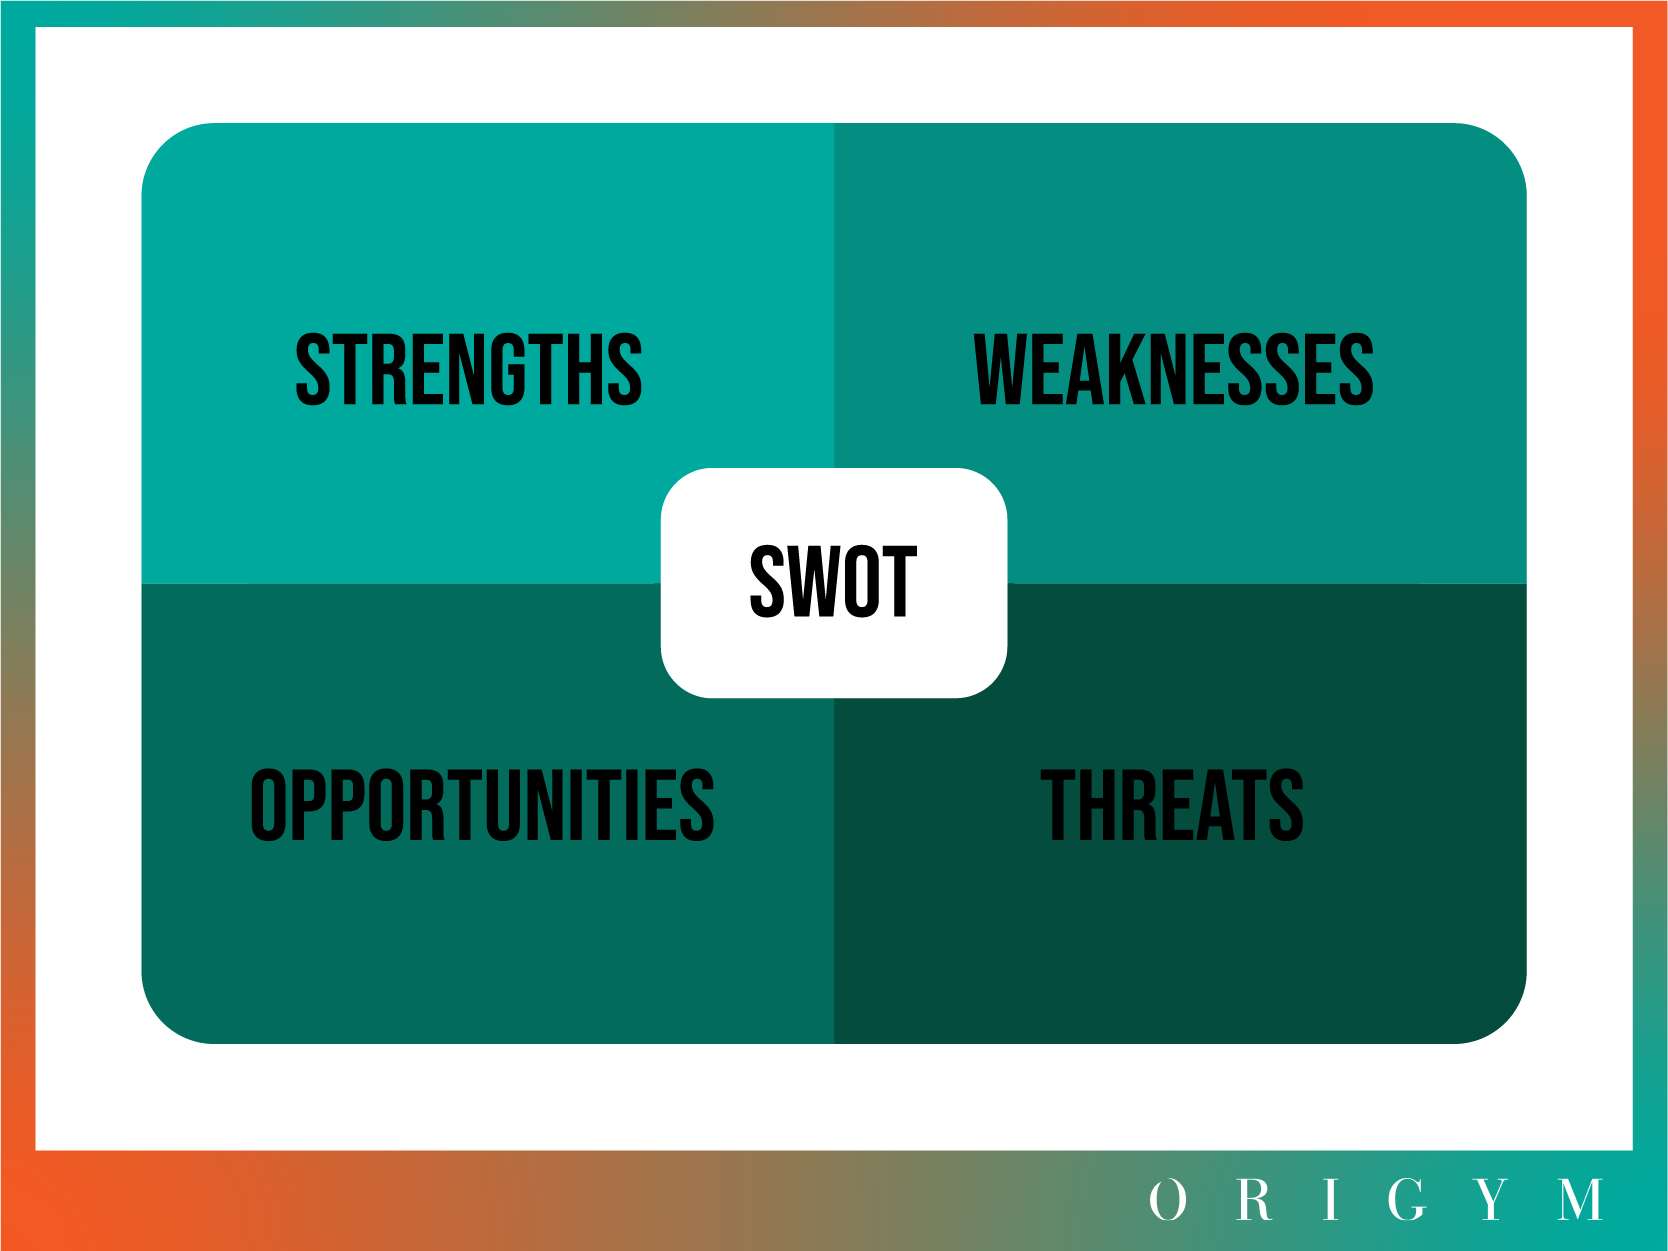 SWOT analysis personal trainer business plan graphic